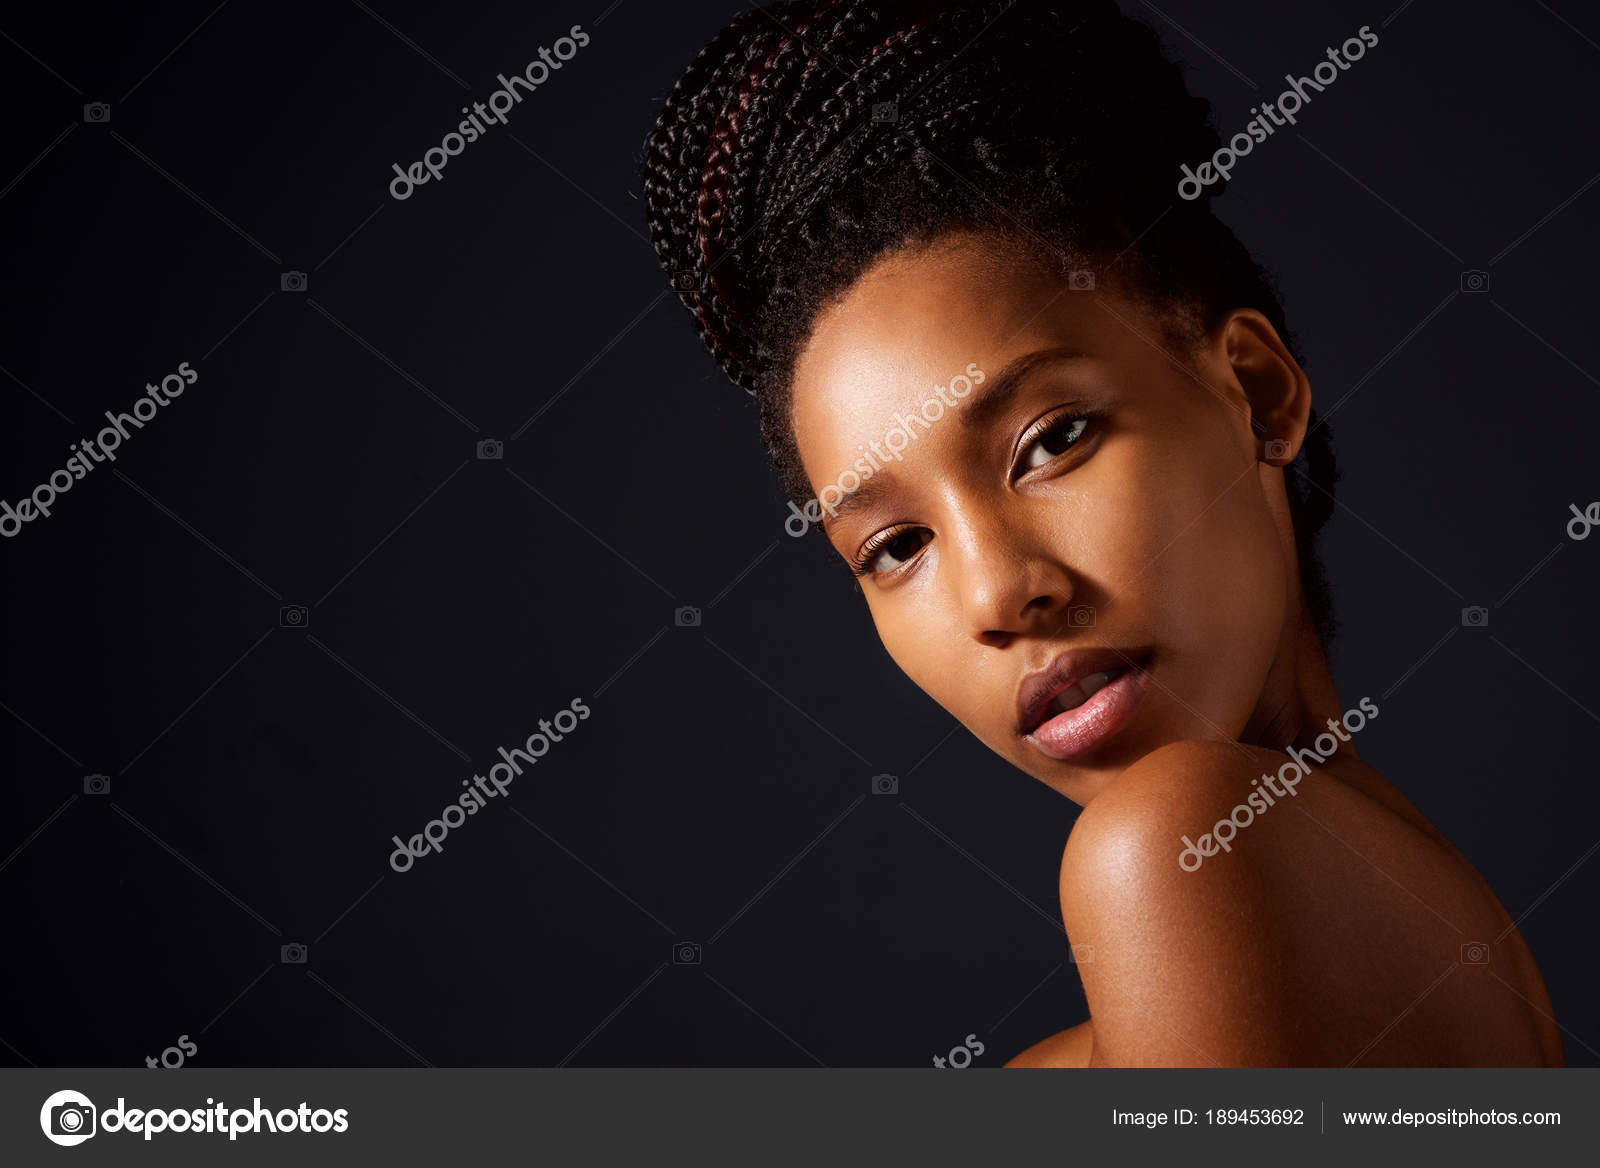 Download african woman naked